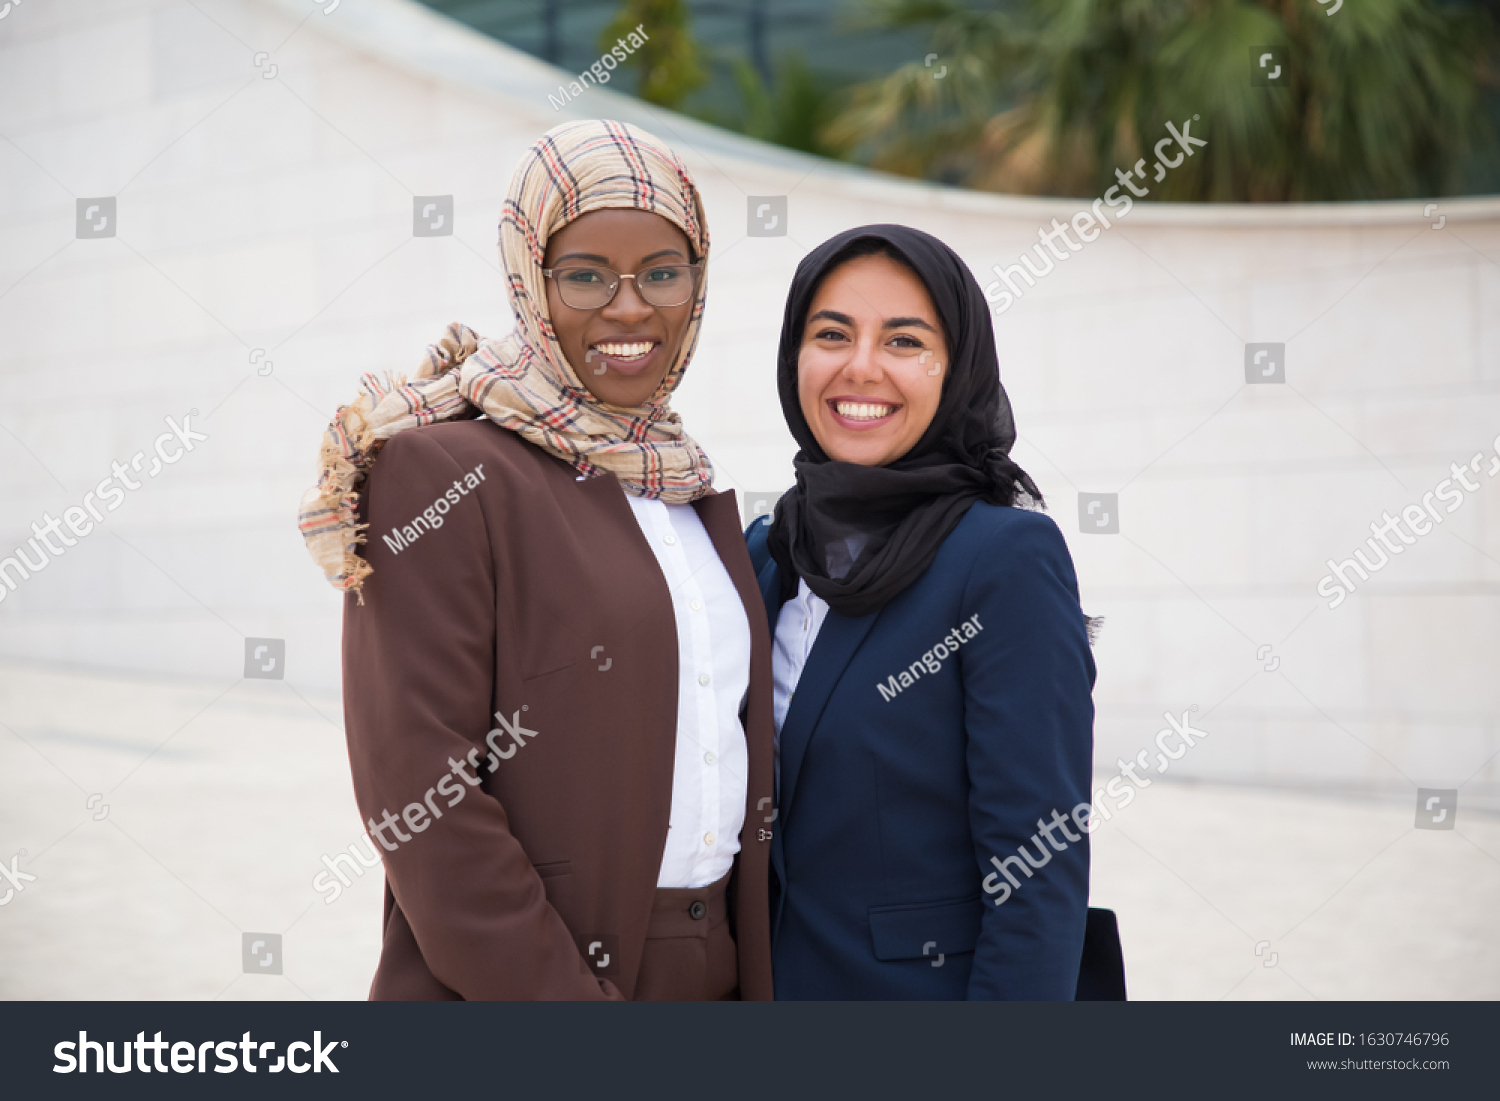 Two confident Muslim women looking at camera. Beautiful cheerful businesswomen posing on street. Female confidence concept #1630746796